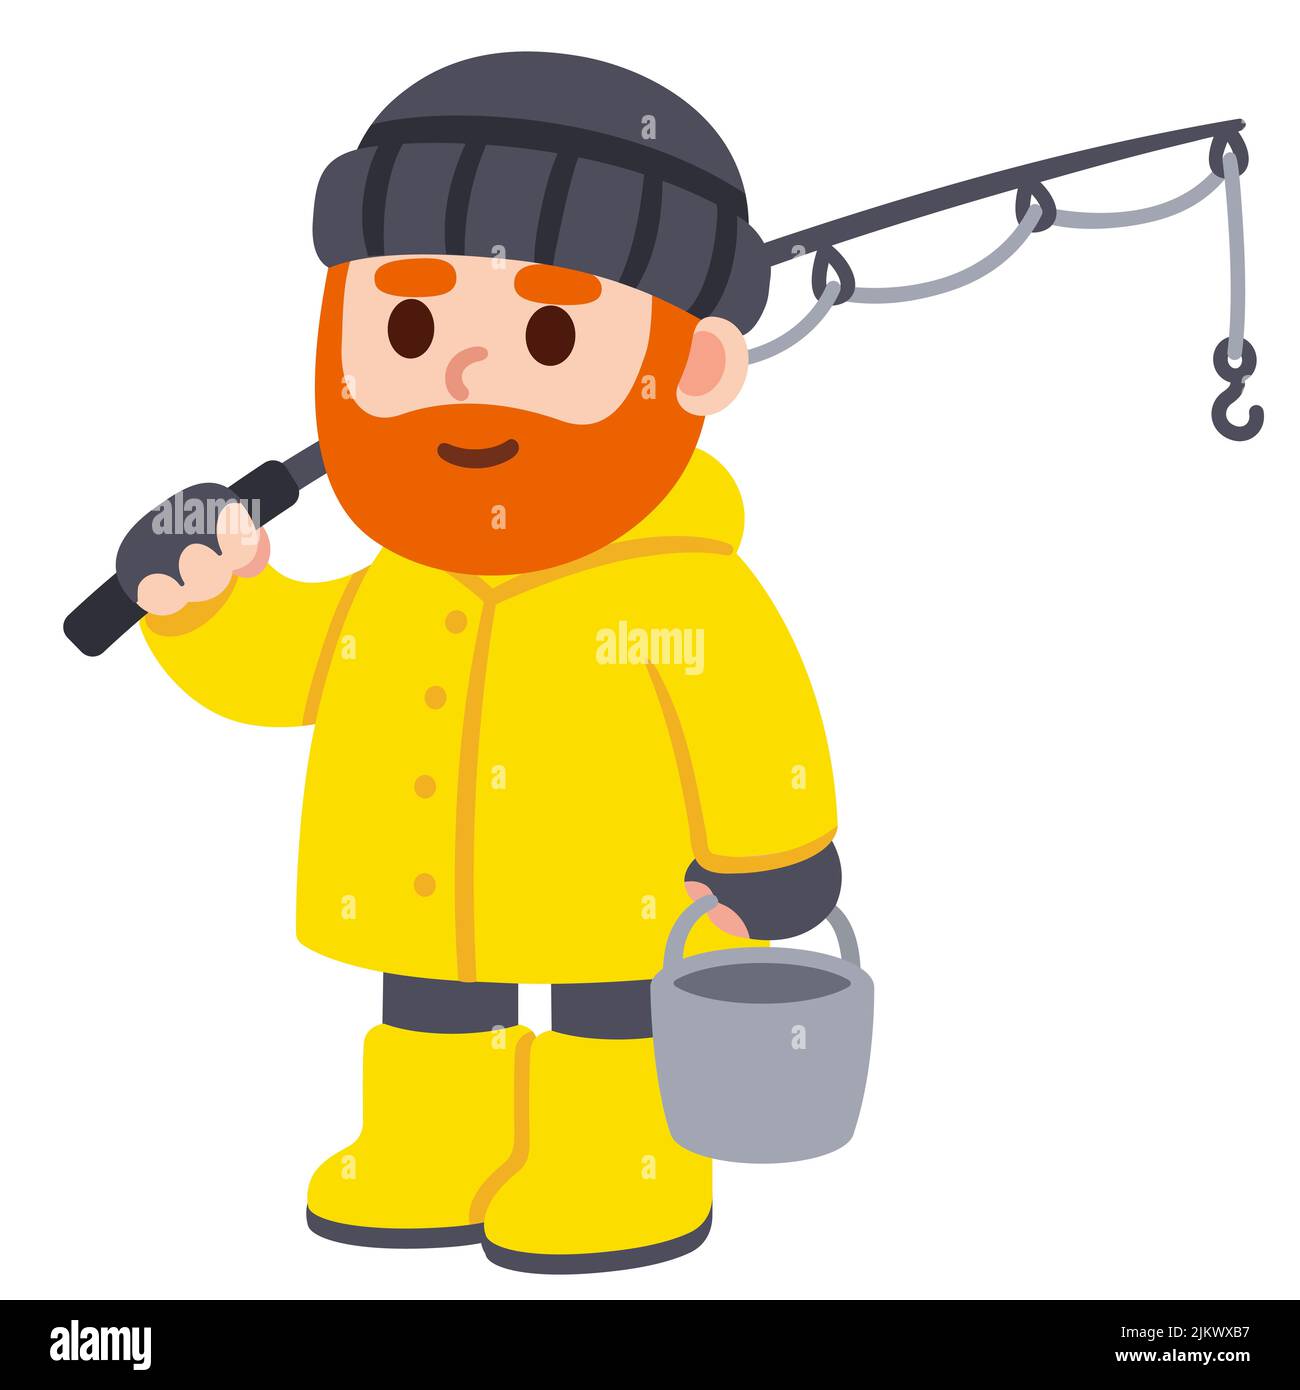 Cute cartoon drawing of a fisherman with red beard holding fishing rod and bucket. Simple flat vector clip art illustration. Stock Vector